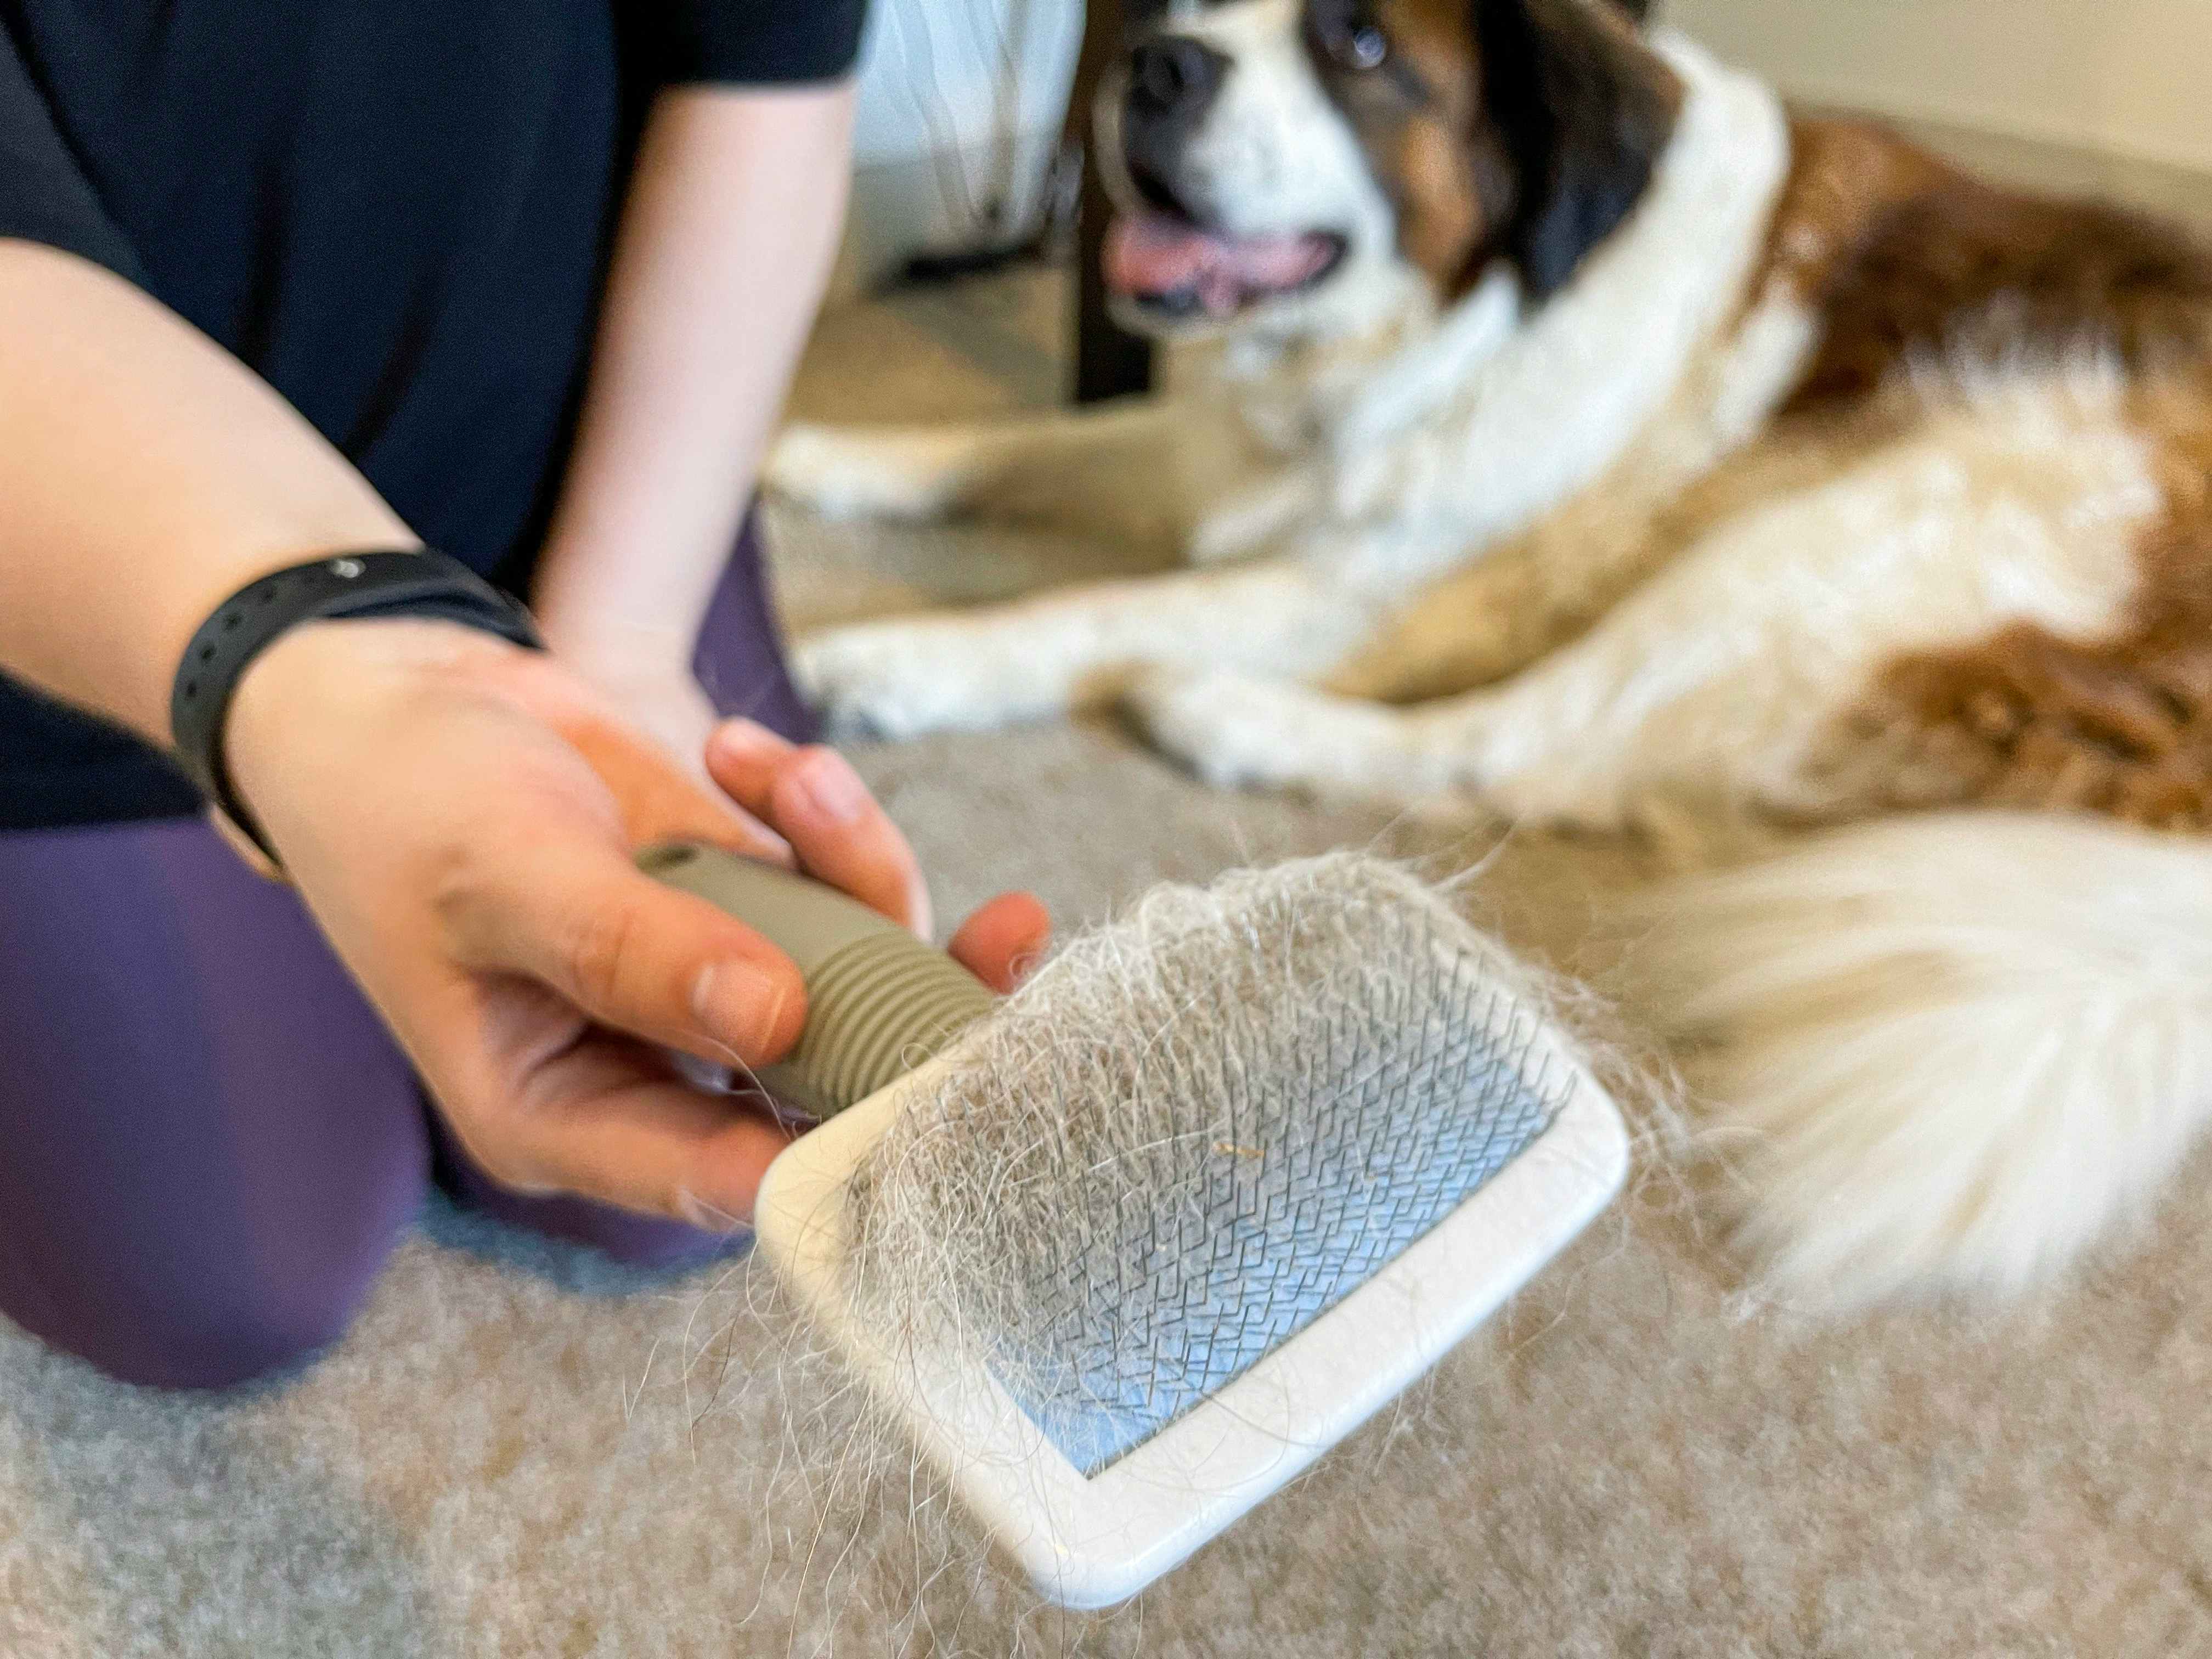 Make your own pet hair-removing power tool with a hand mixer - CNET